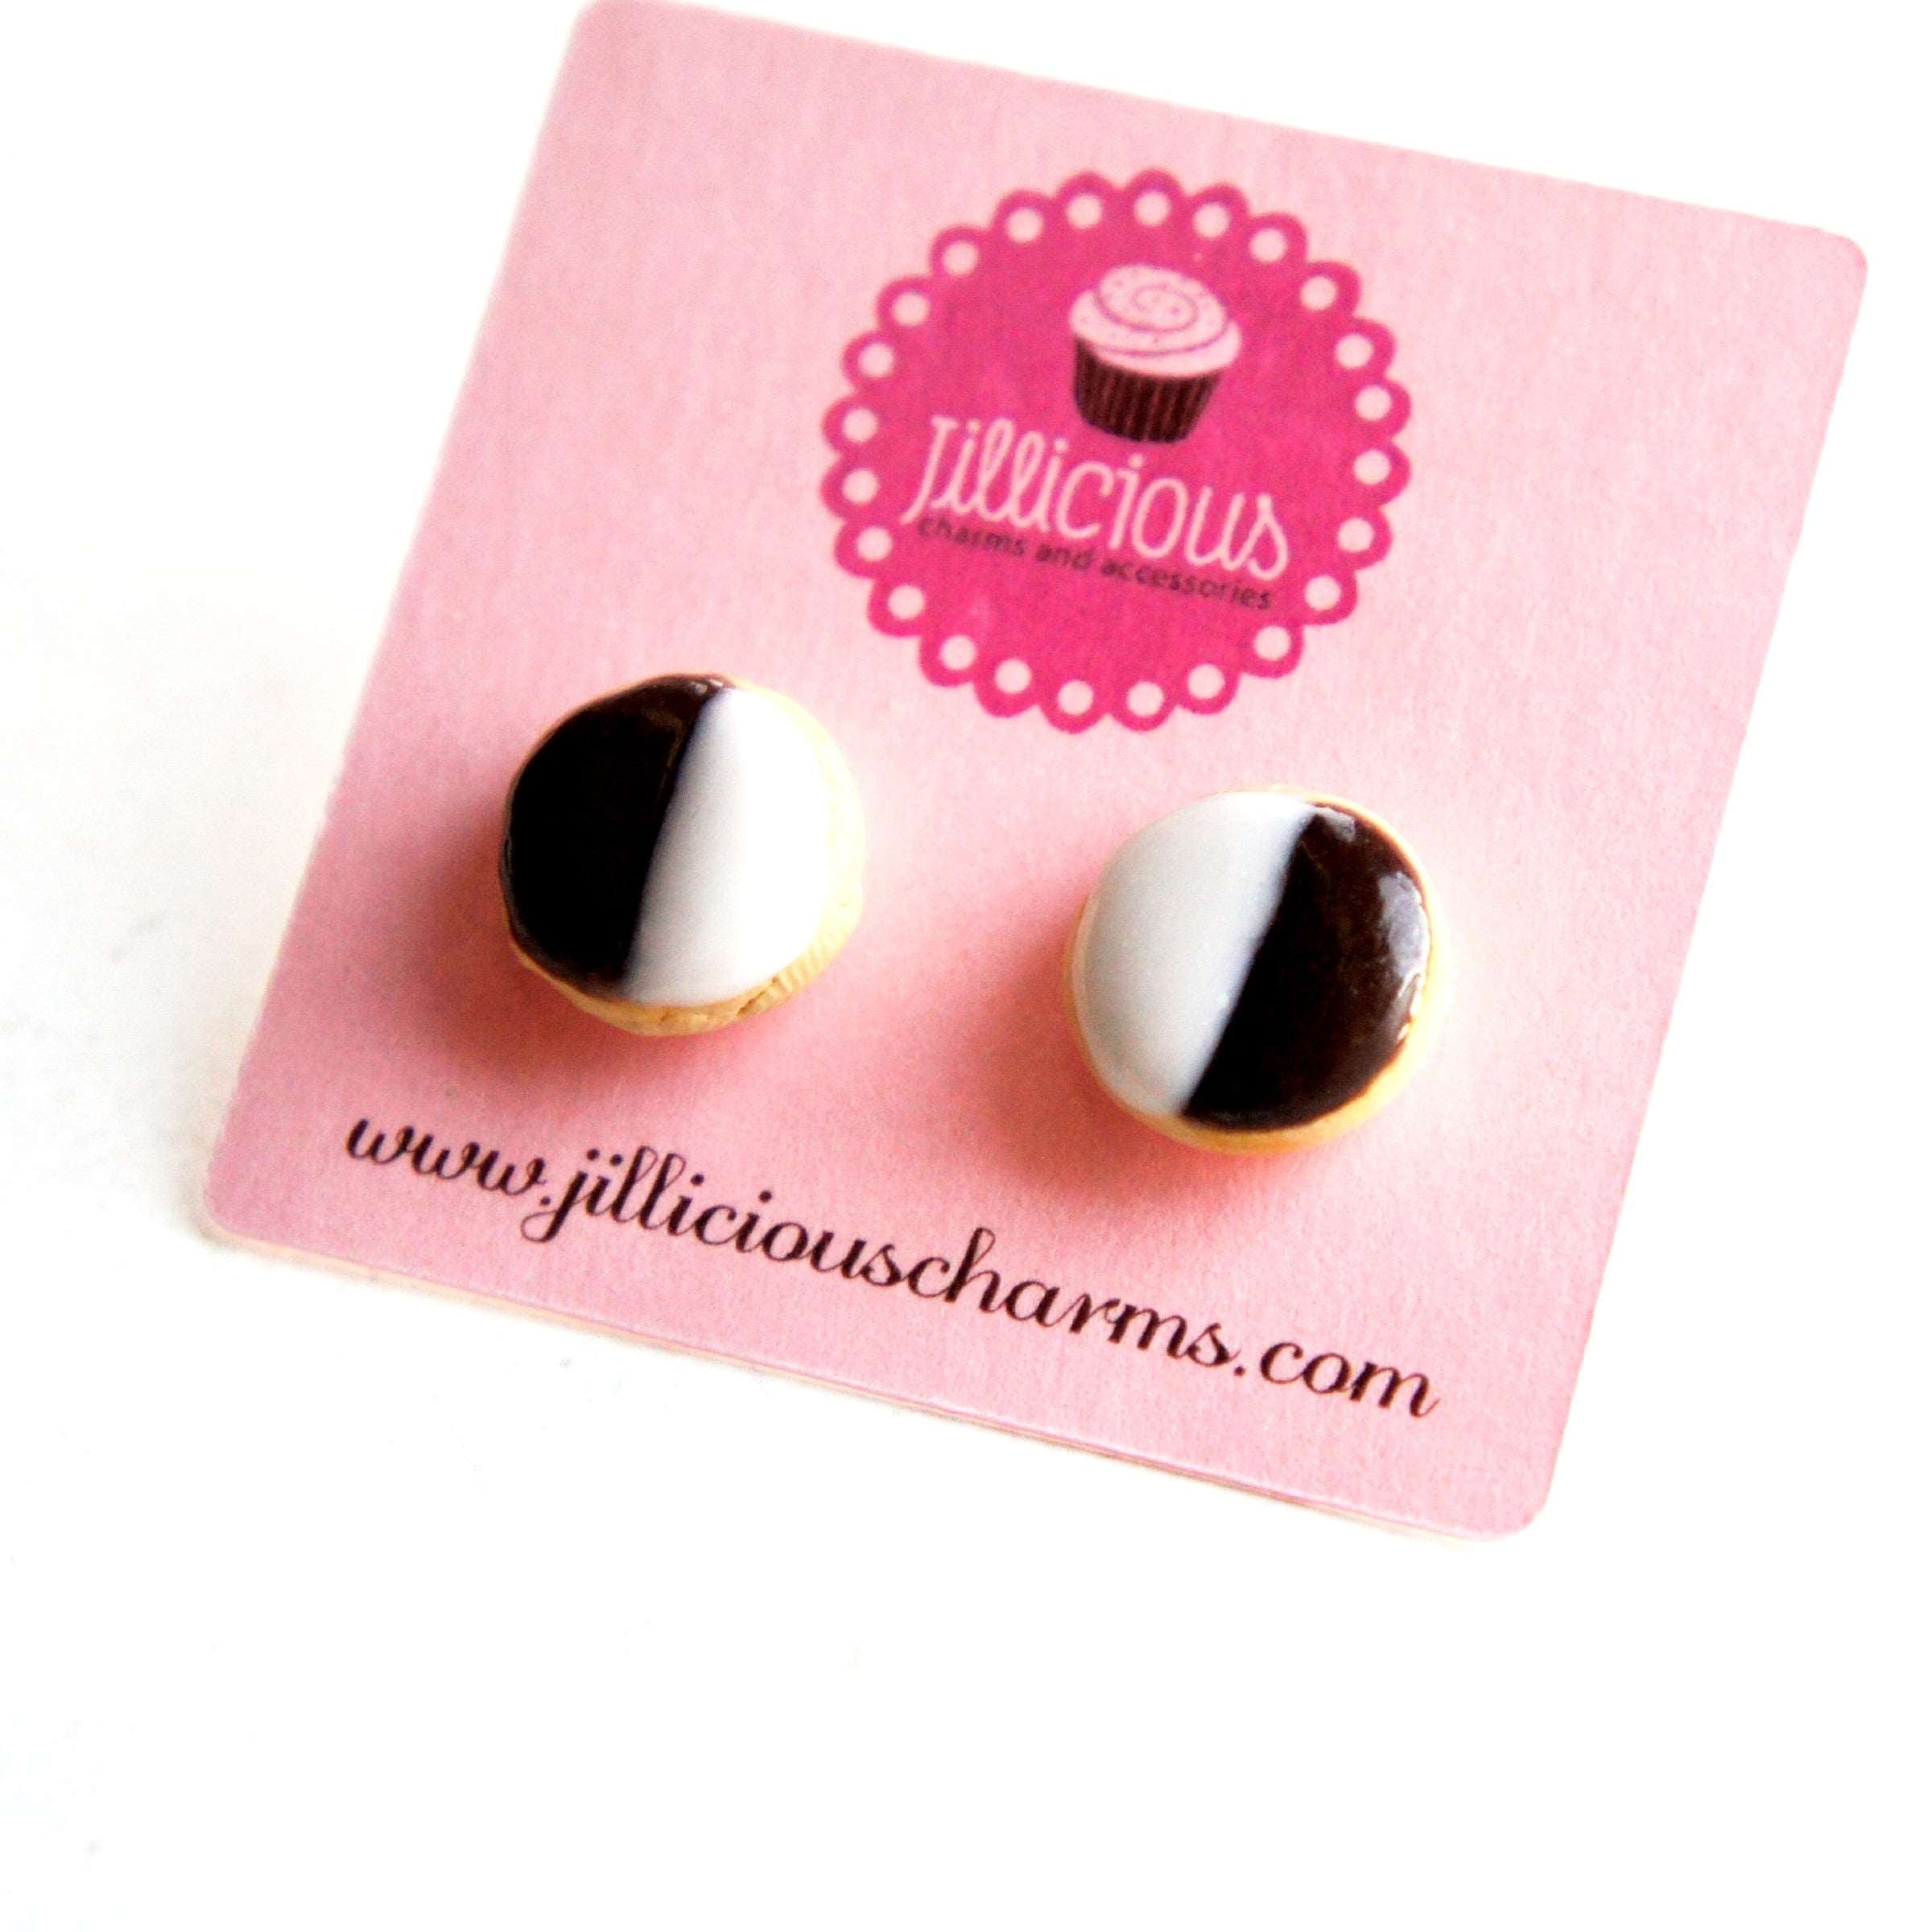 Black and White Cookies Stud Earrings - Jillicious charms and accessories